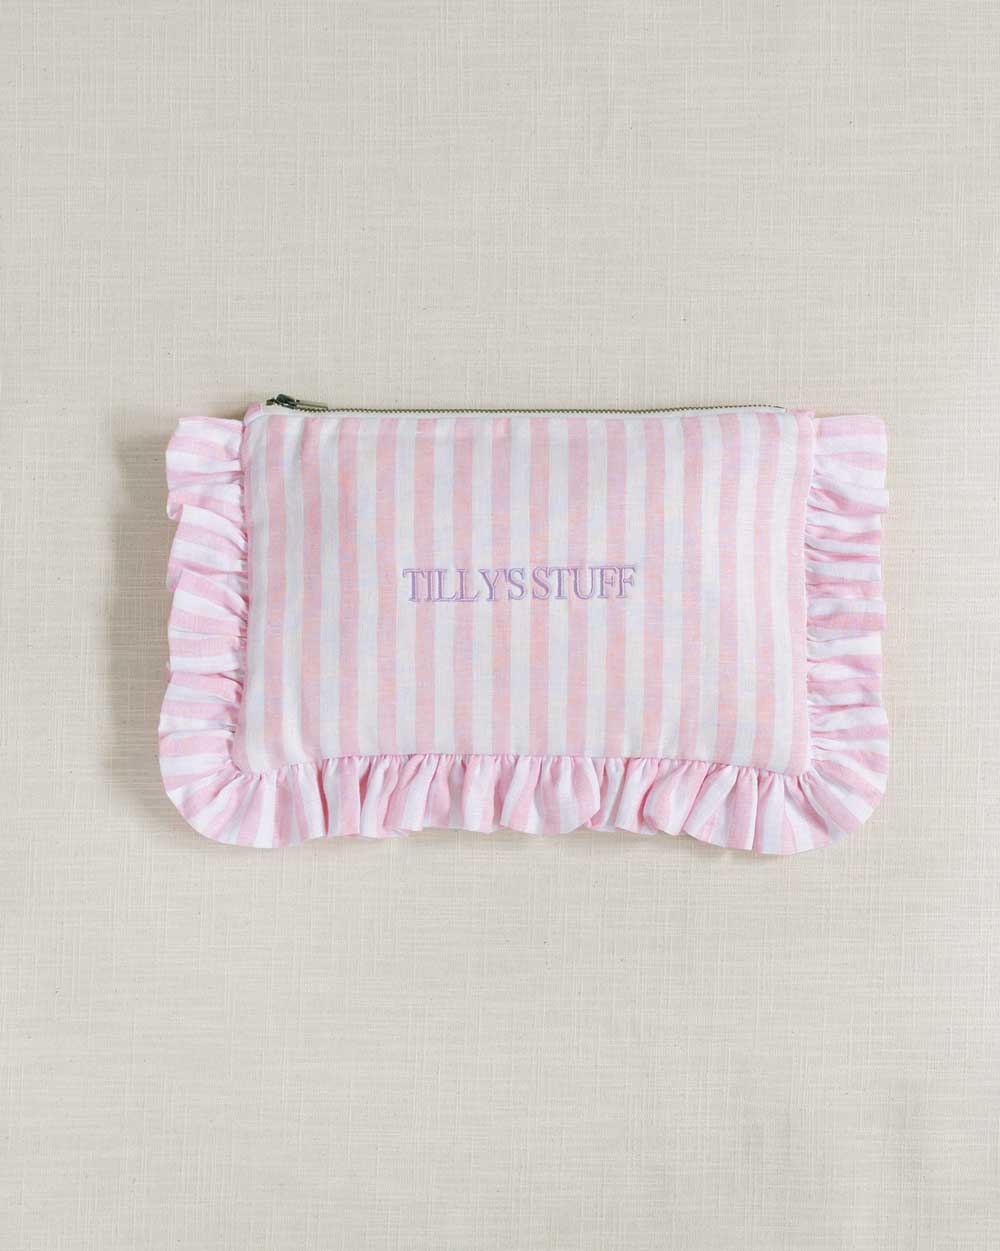 The Pink Stripe Ruffled Pouch